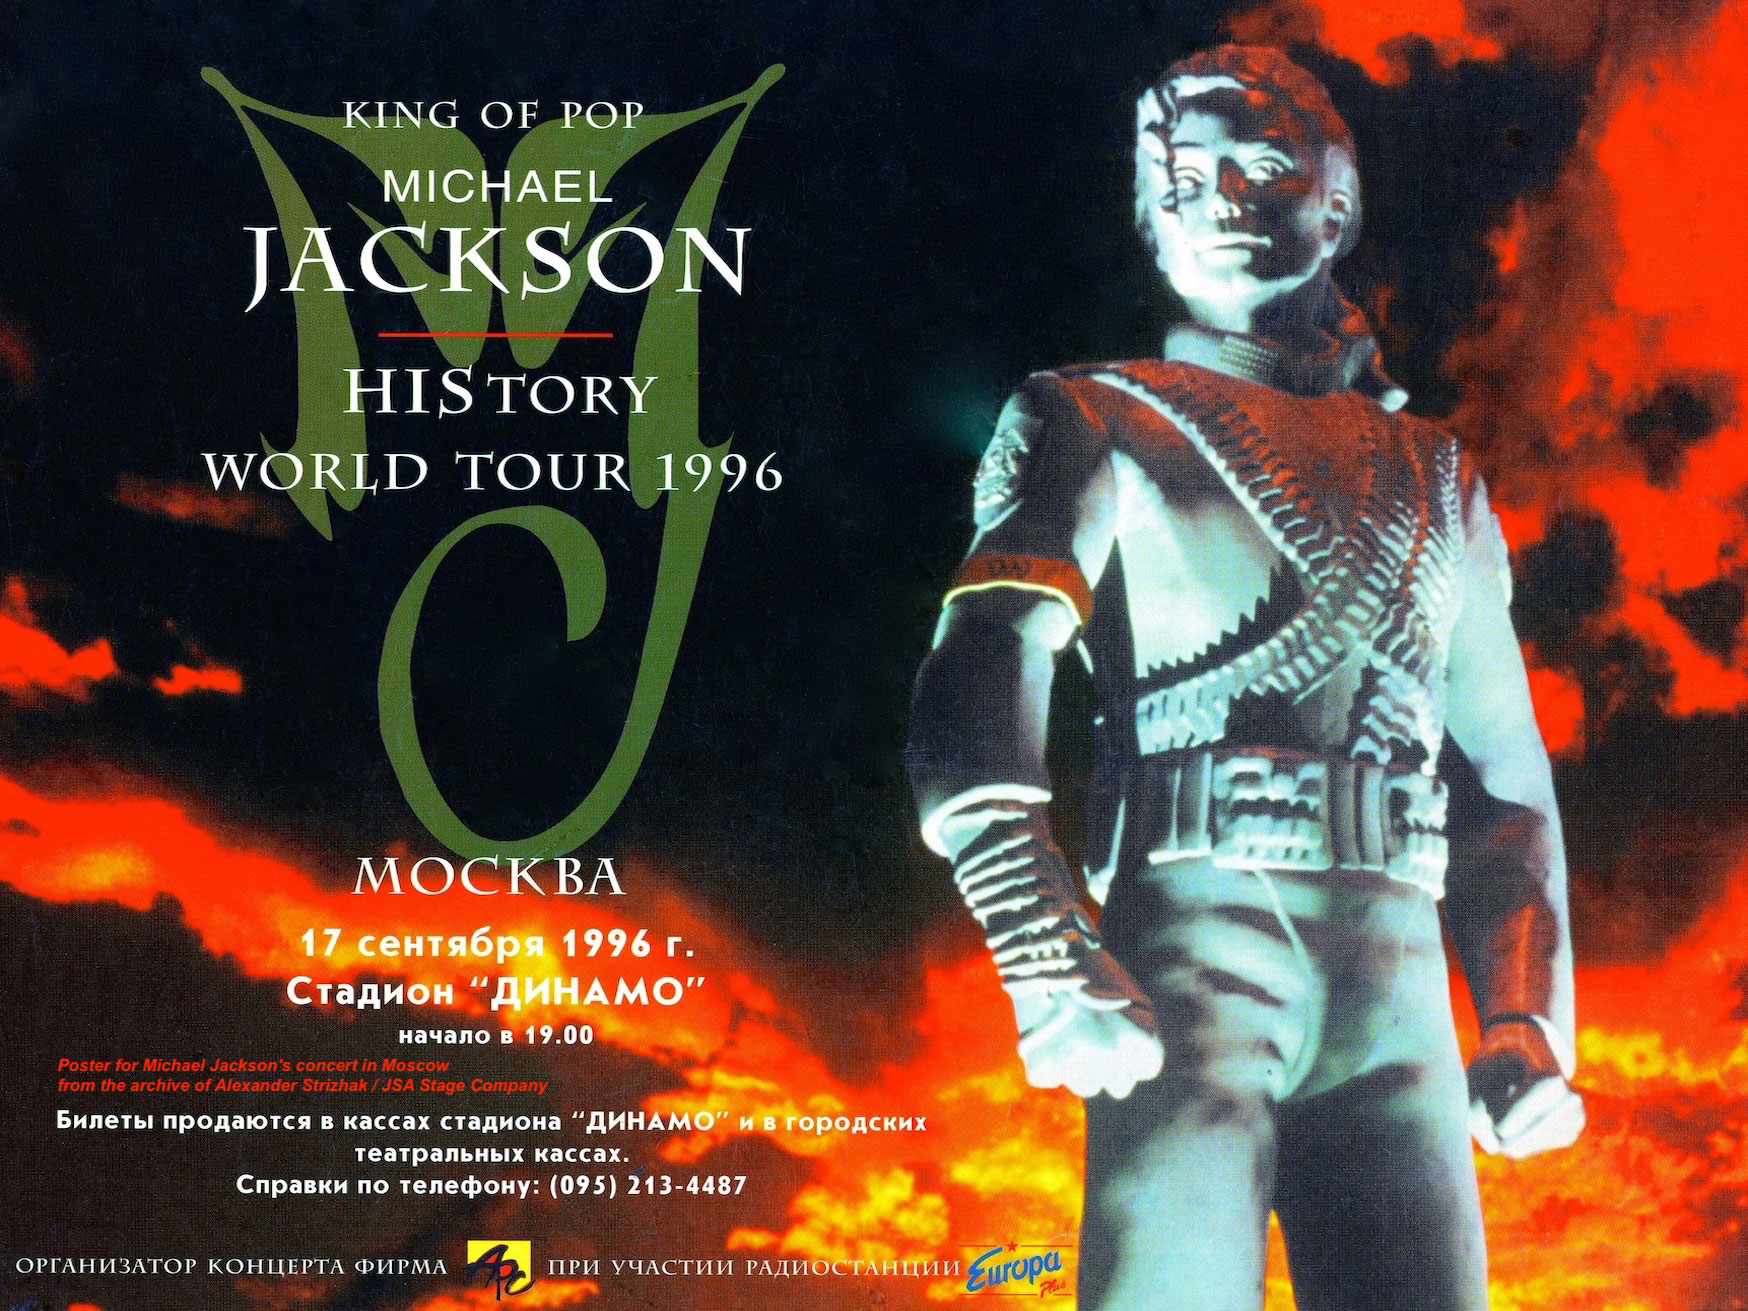 MICHAEL JACKSON. HISTORY WORLD TOUR CONCERT IN MOSCOW SEPTEMBER 17